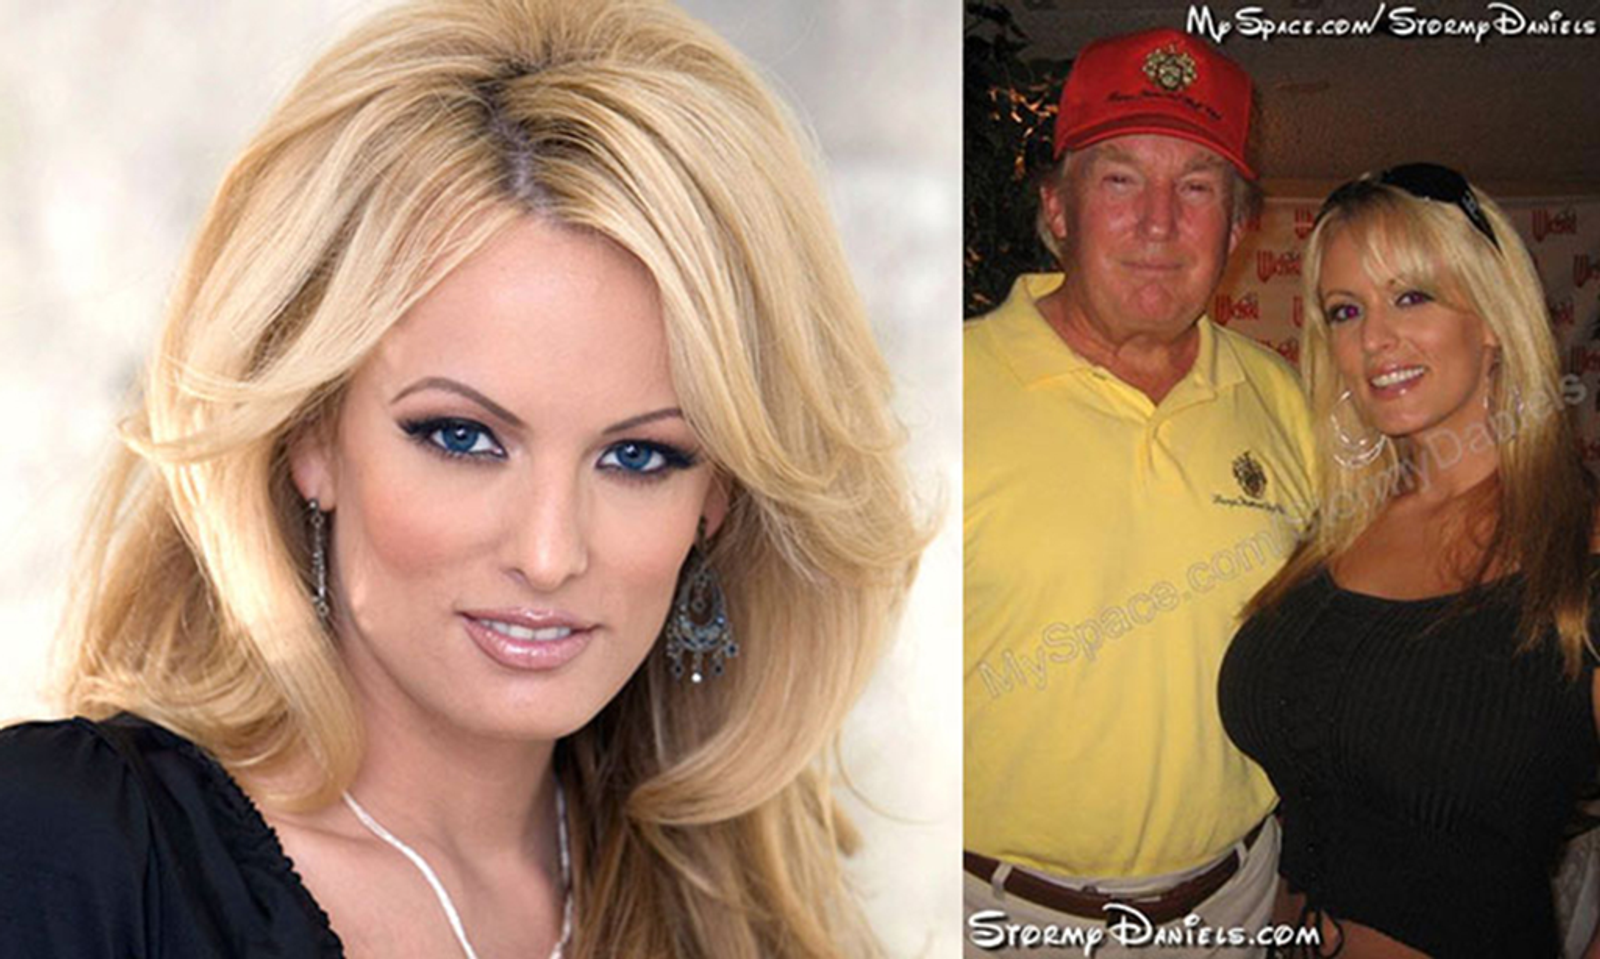 F.E.C. Ends Probe Into Trump 'Hush' Payment to Stormy Daniels